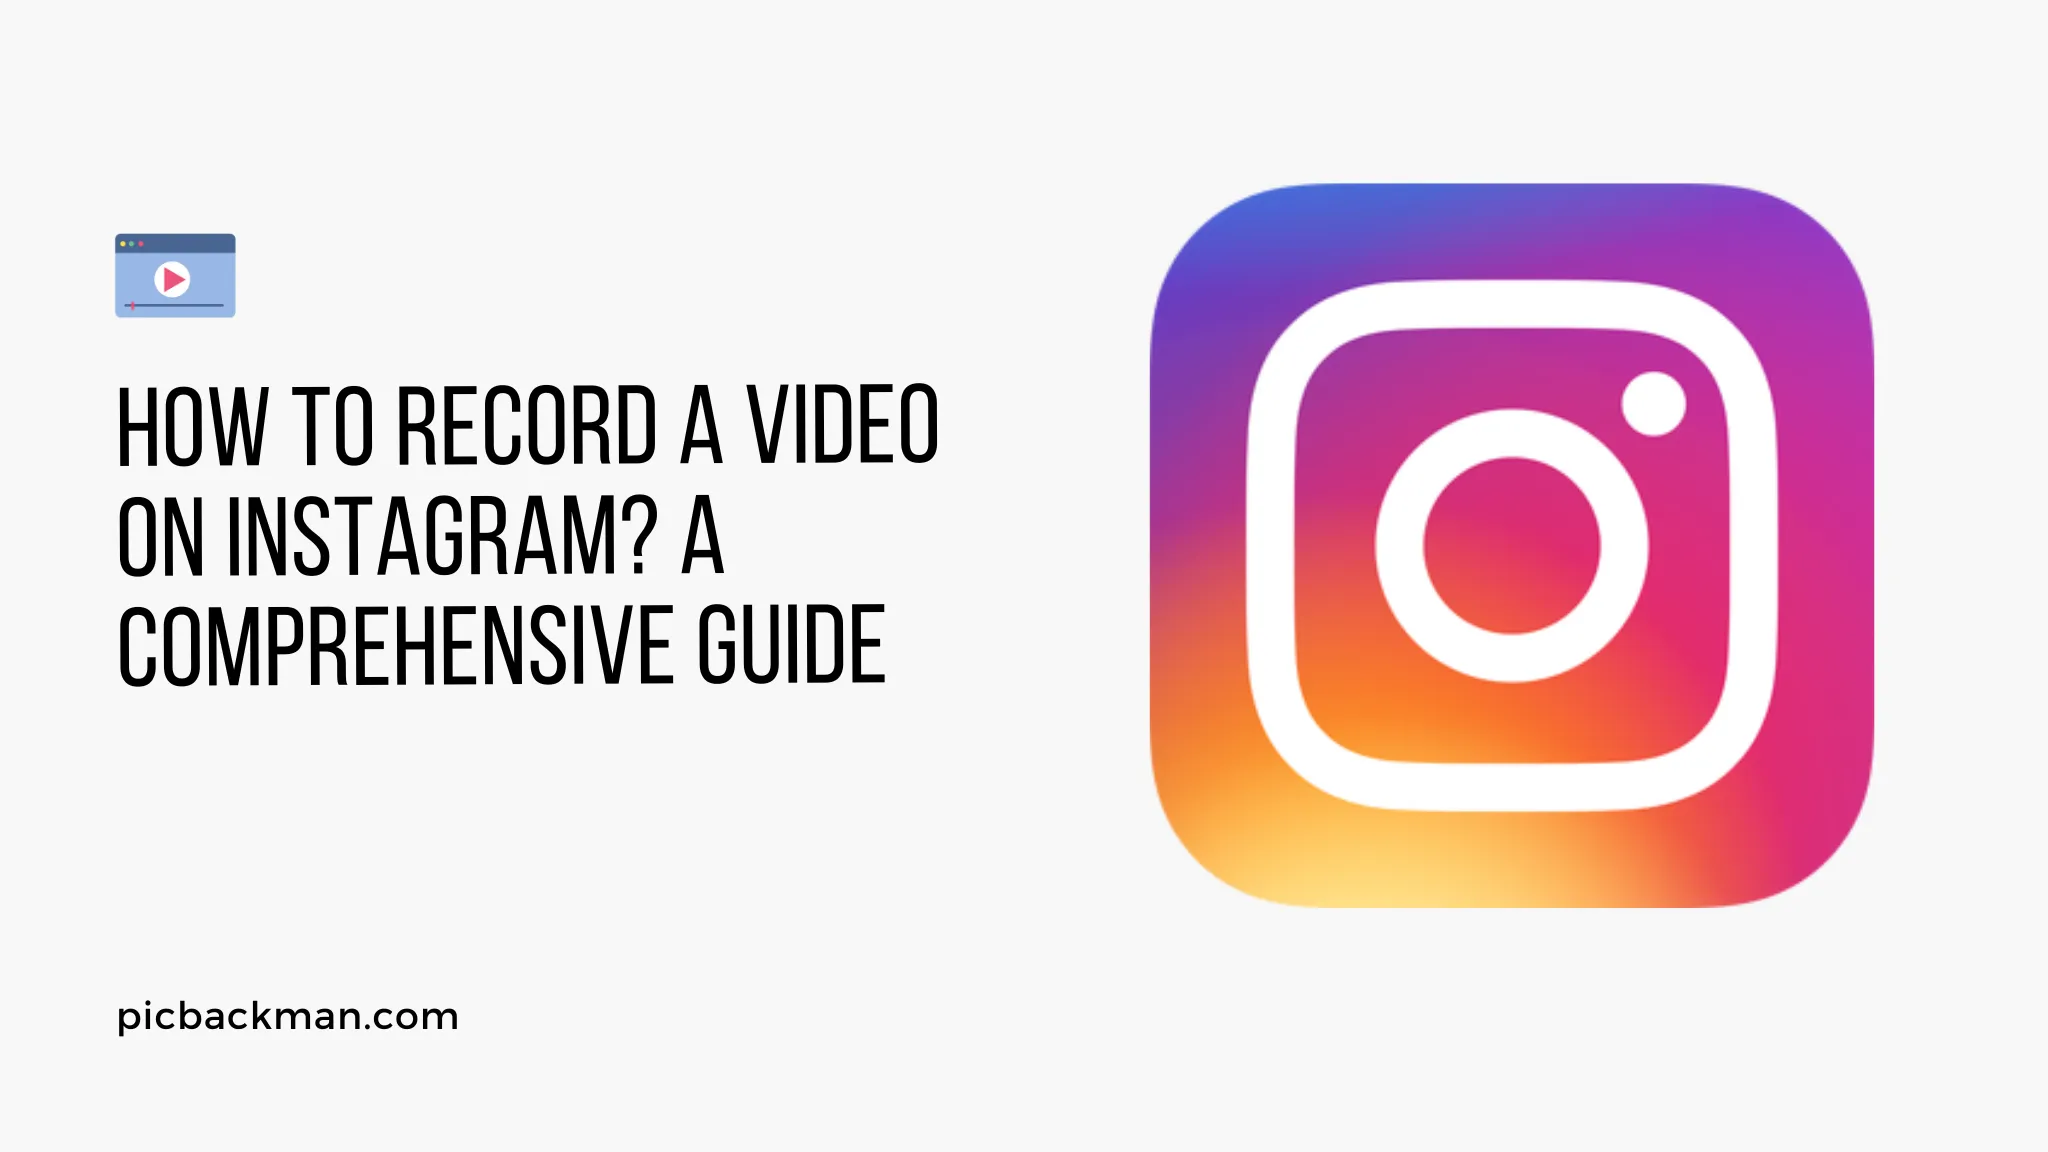 How to Record a Video on Instagram